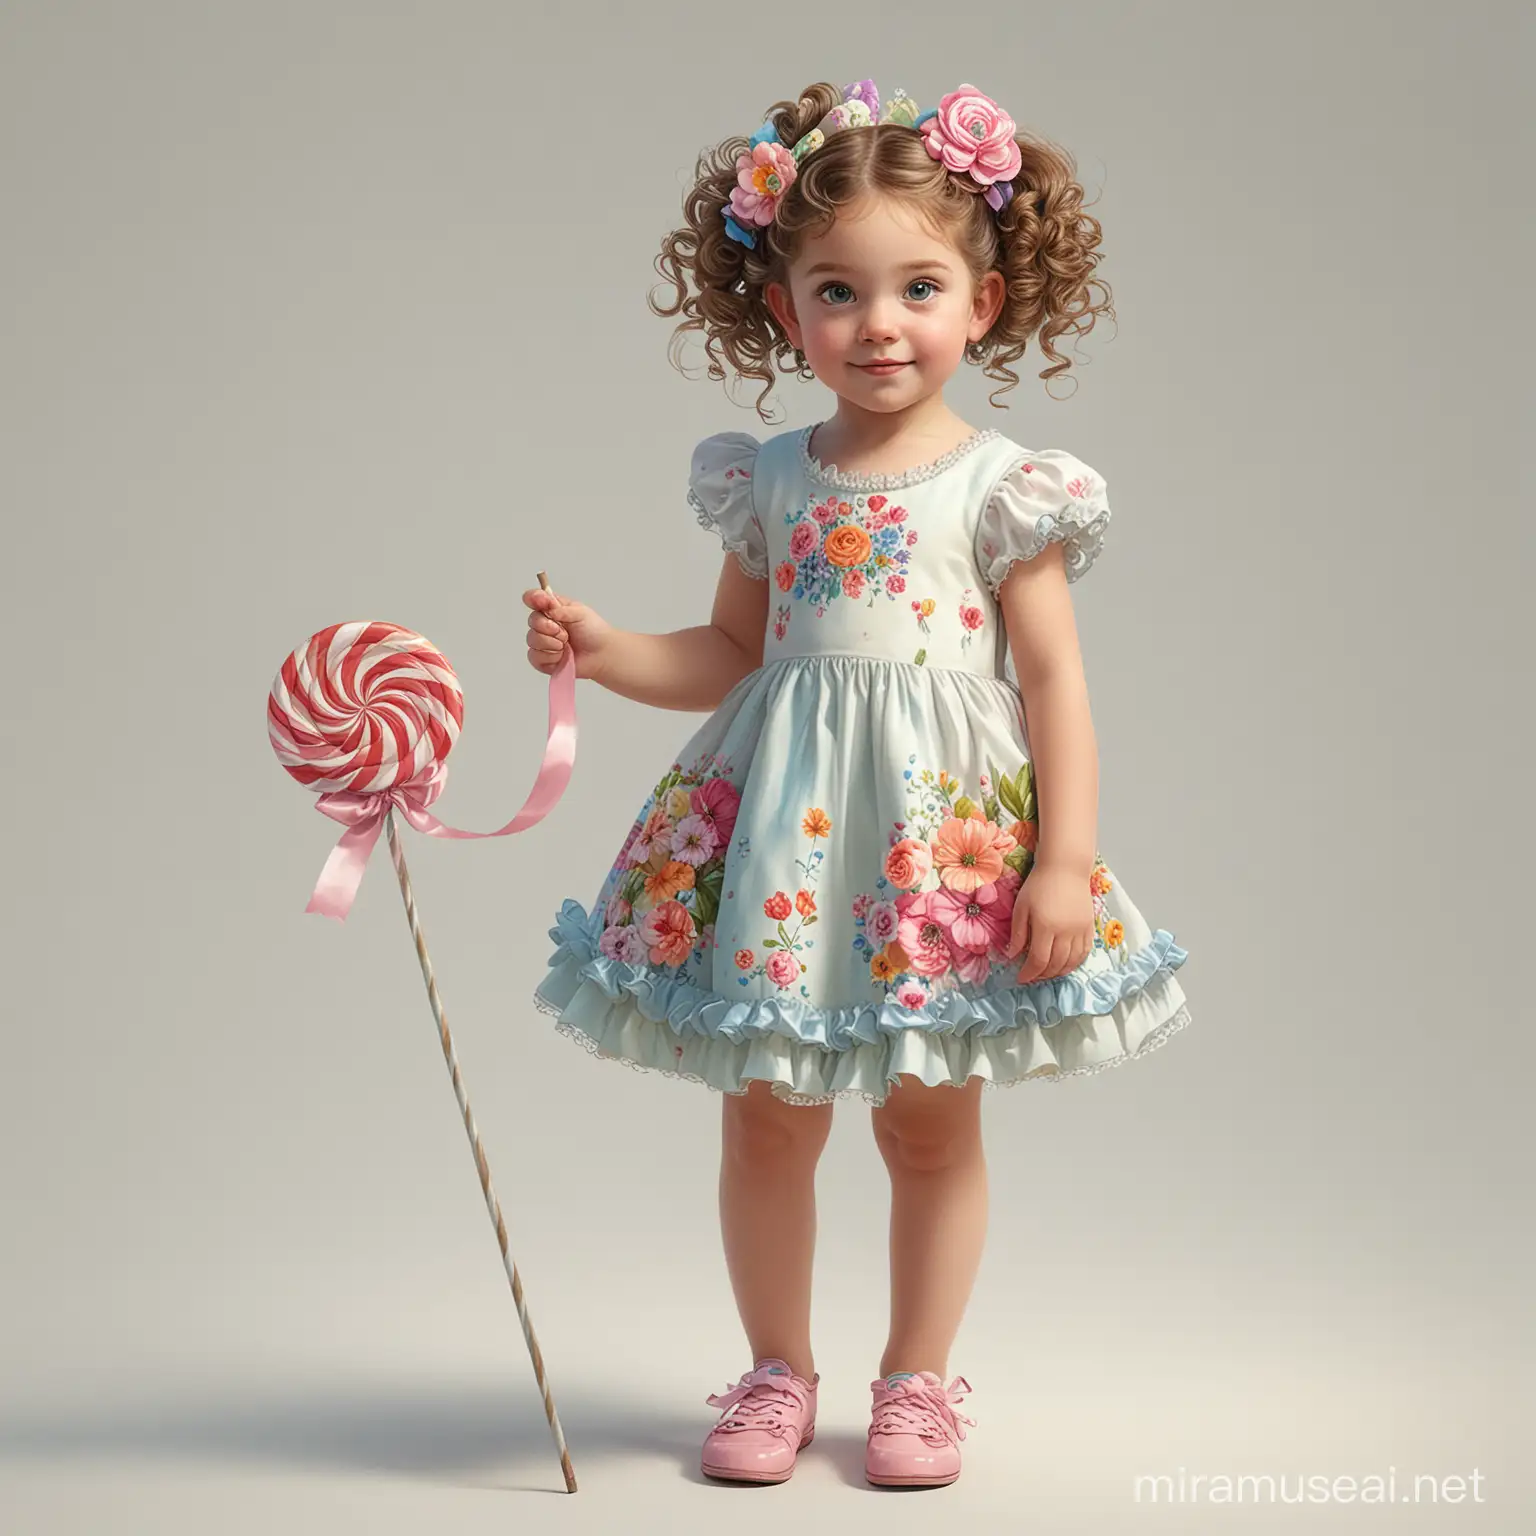 realistic full body shot of a beautiful little girl with flowers in hair, curls, lollypop, hairbow, dress with puppy's, cartoonish, inventive character designs, color settings, 
highly detailed digital art, fixed on white background, watercolor effect, james gurney art --v 5.2 --s 250
